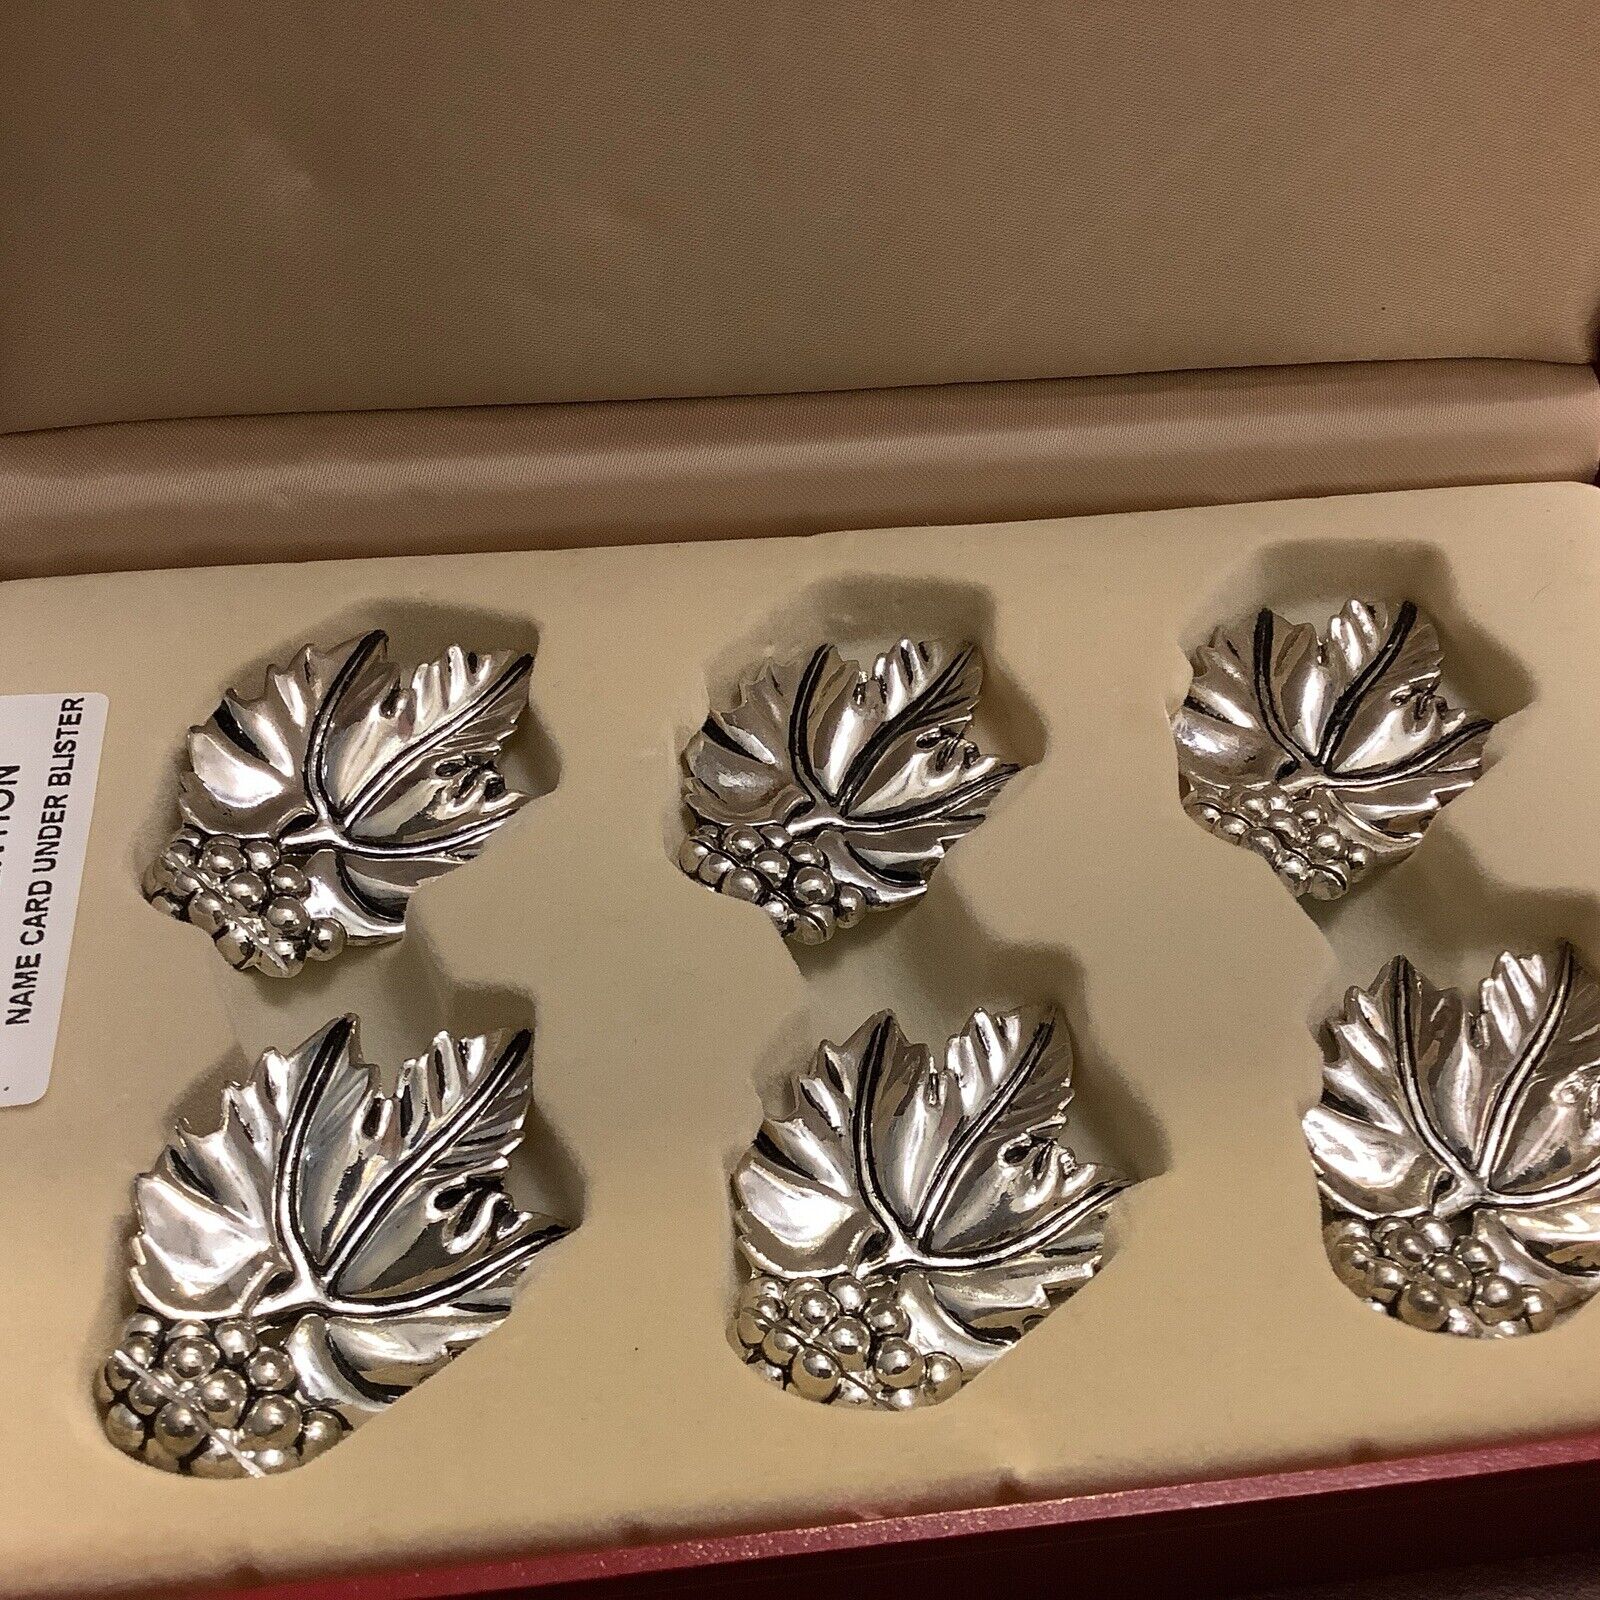 NEW/NIB~(6) Heavy Silverplate Name Card Holders~Grapes/Grape Leaves~w/Name Cards